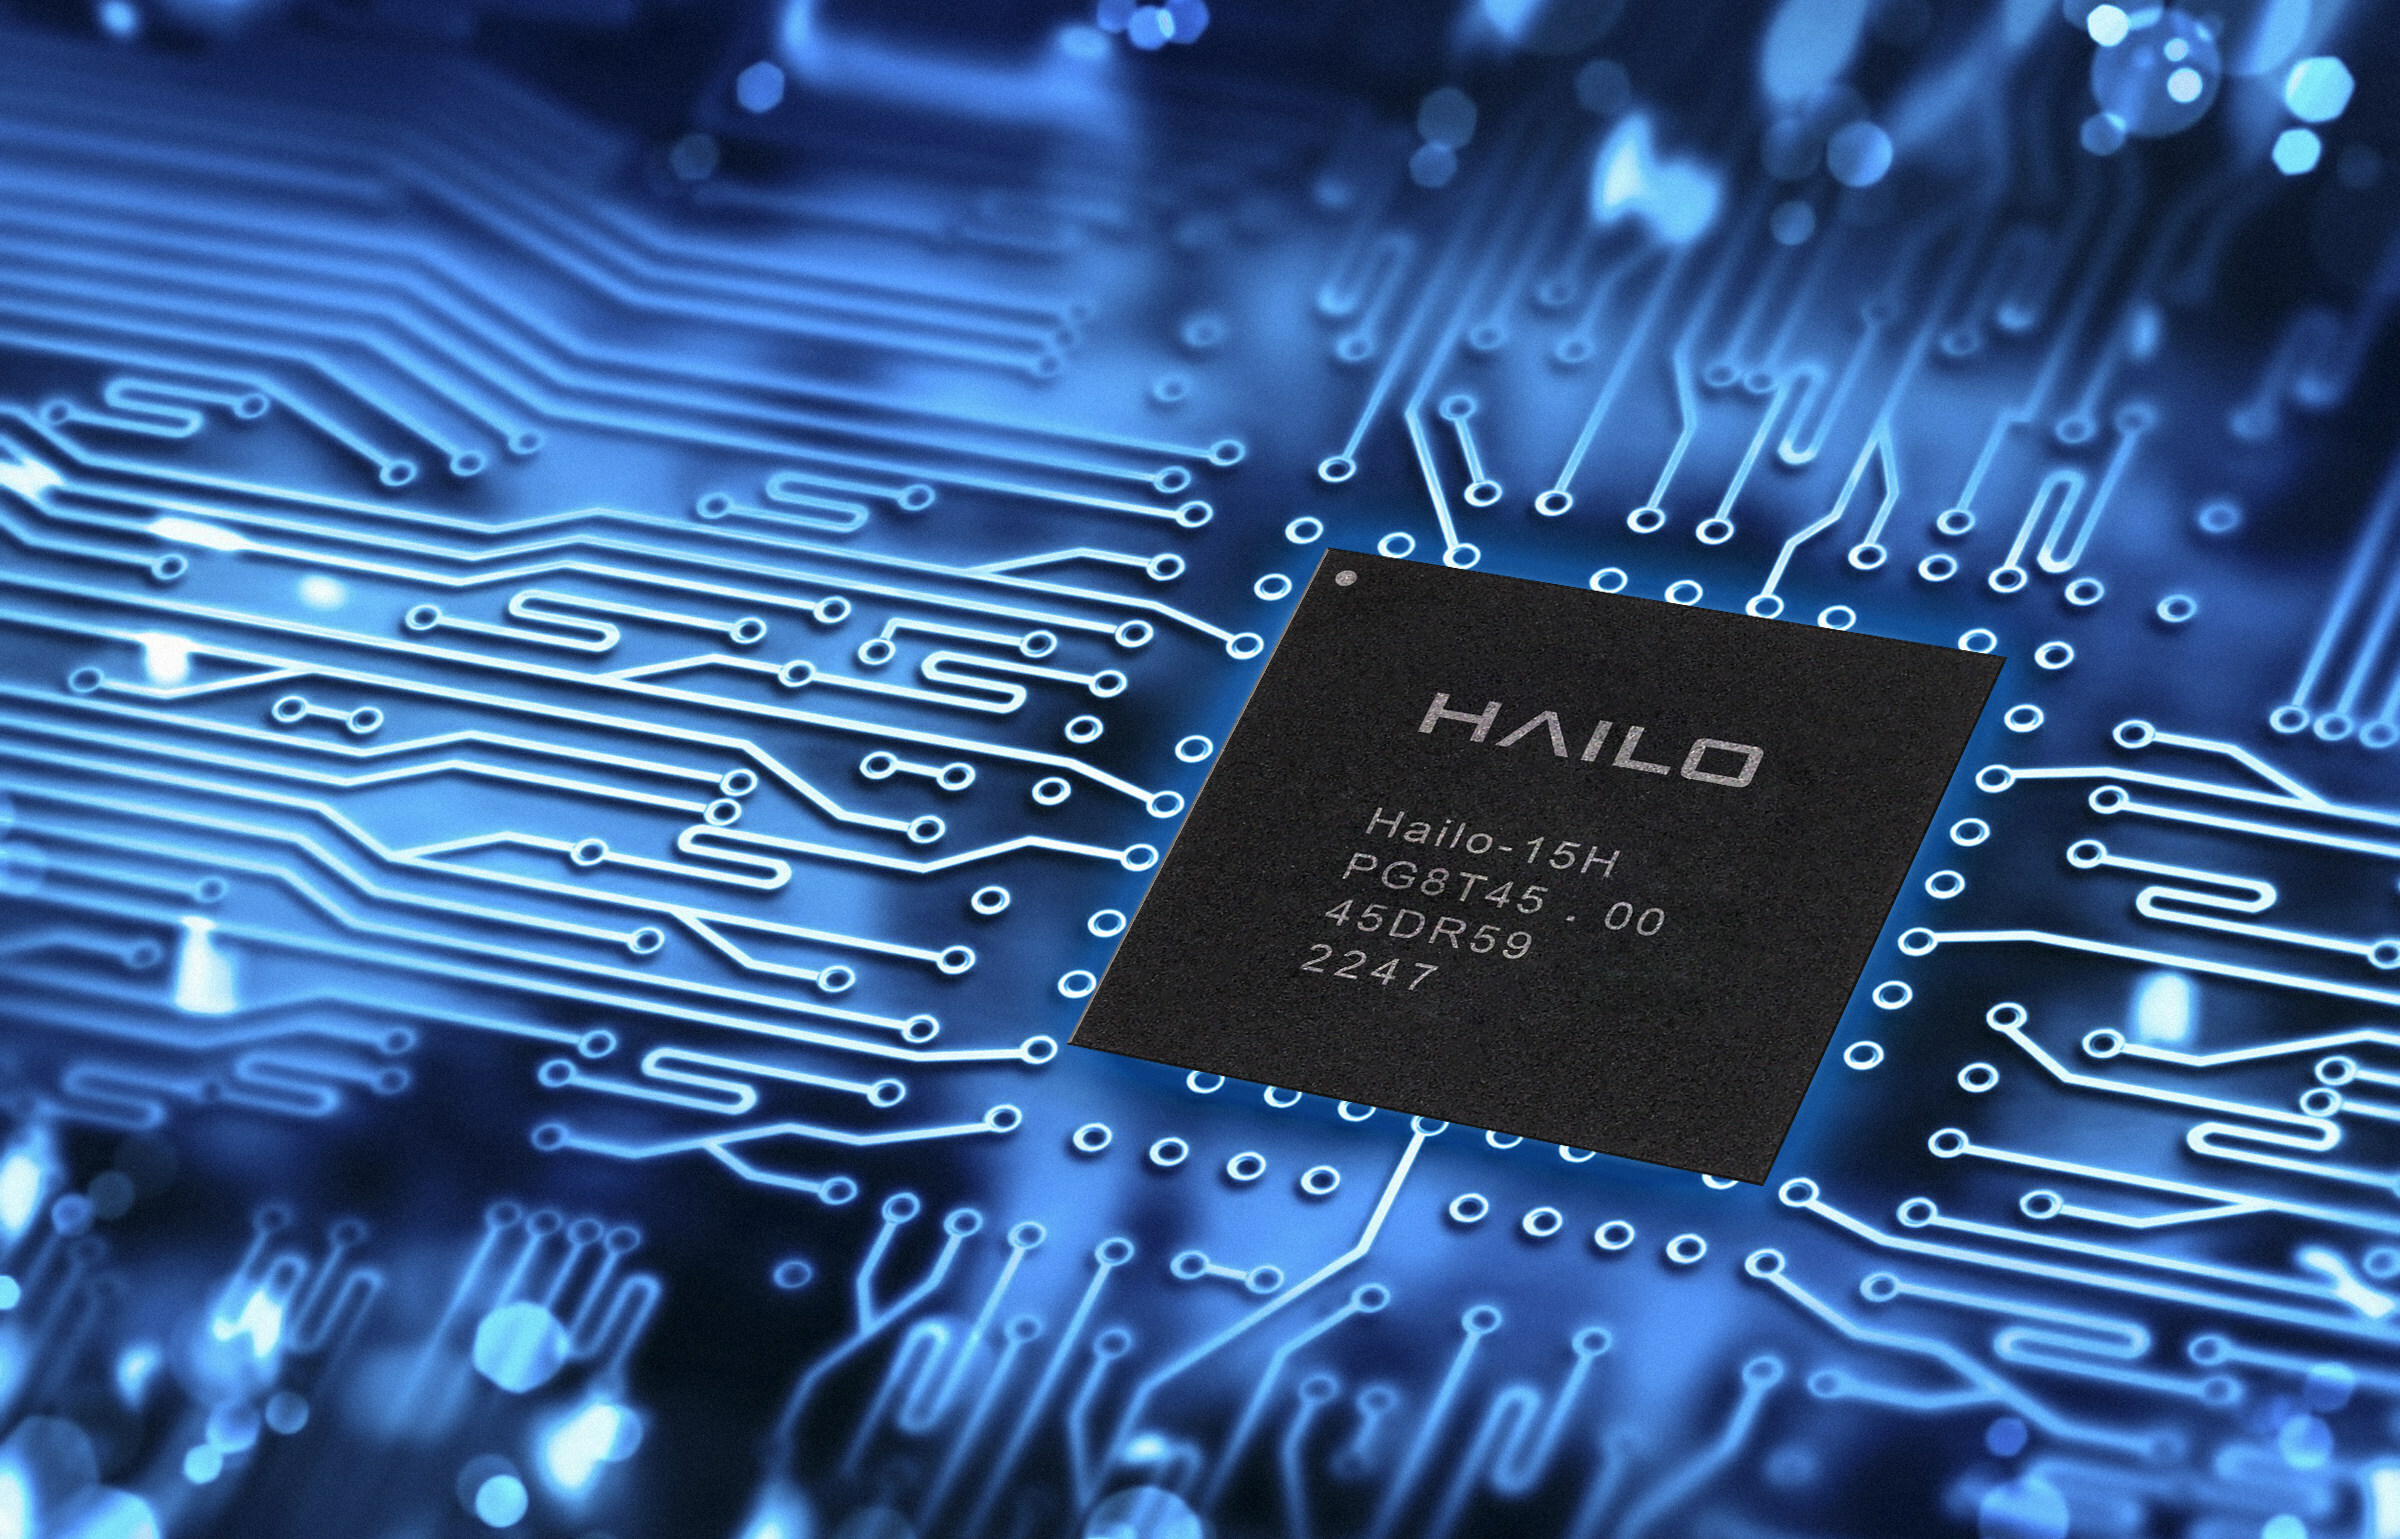 Hailo introduces Hailo-15 vision processor with exceptional AI capabilities